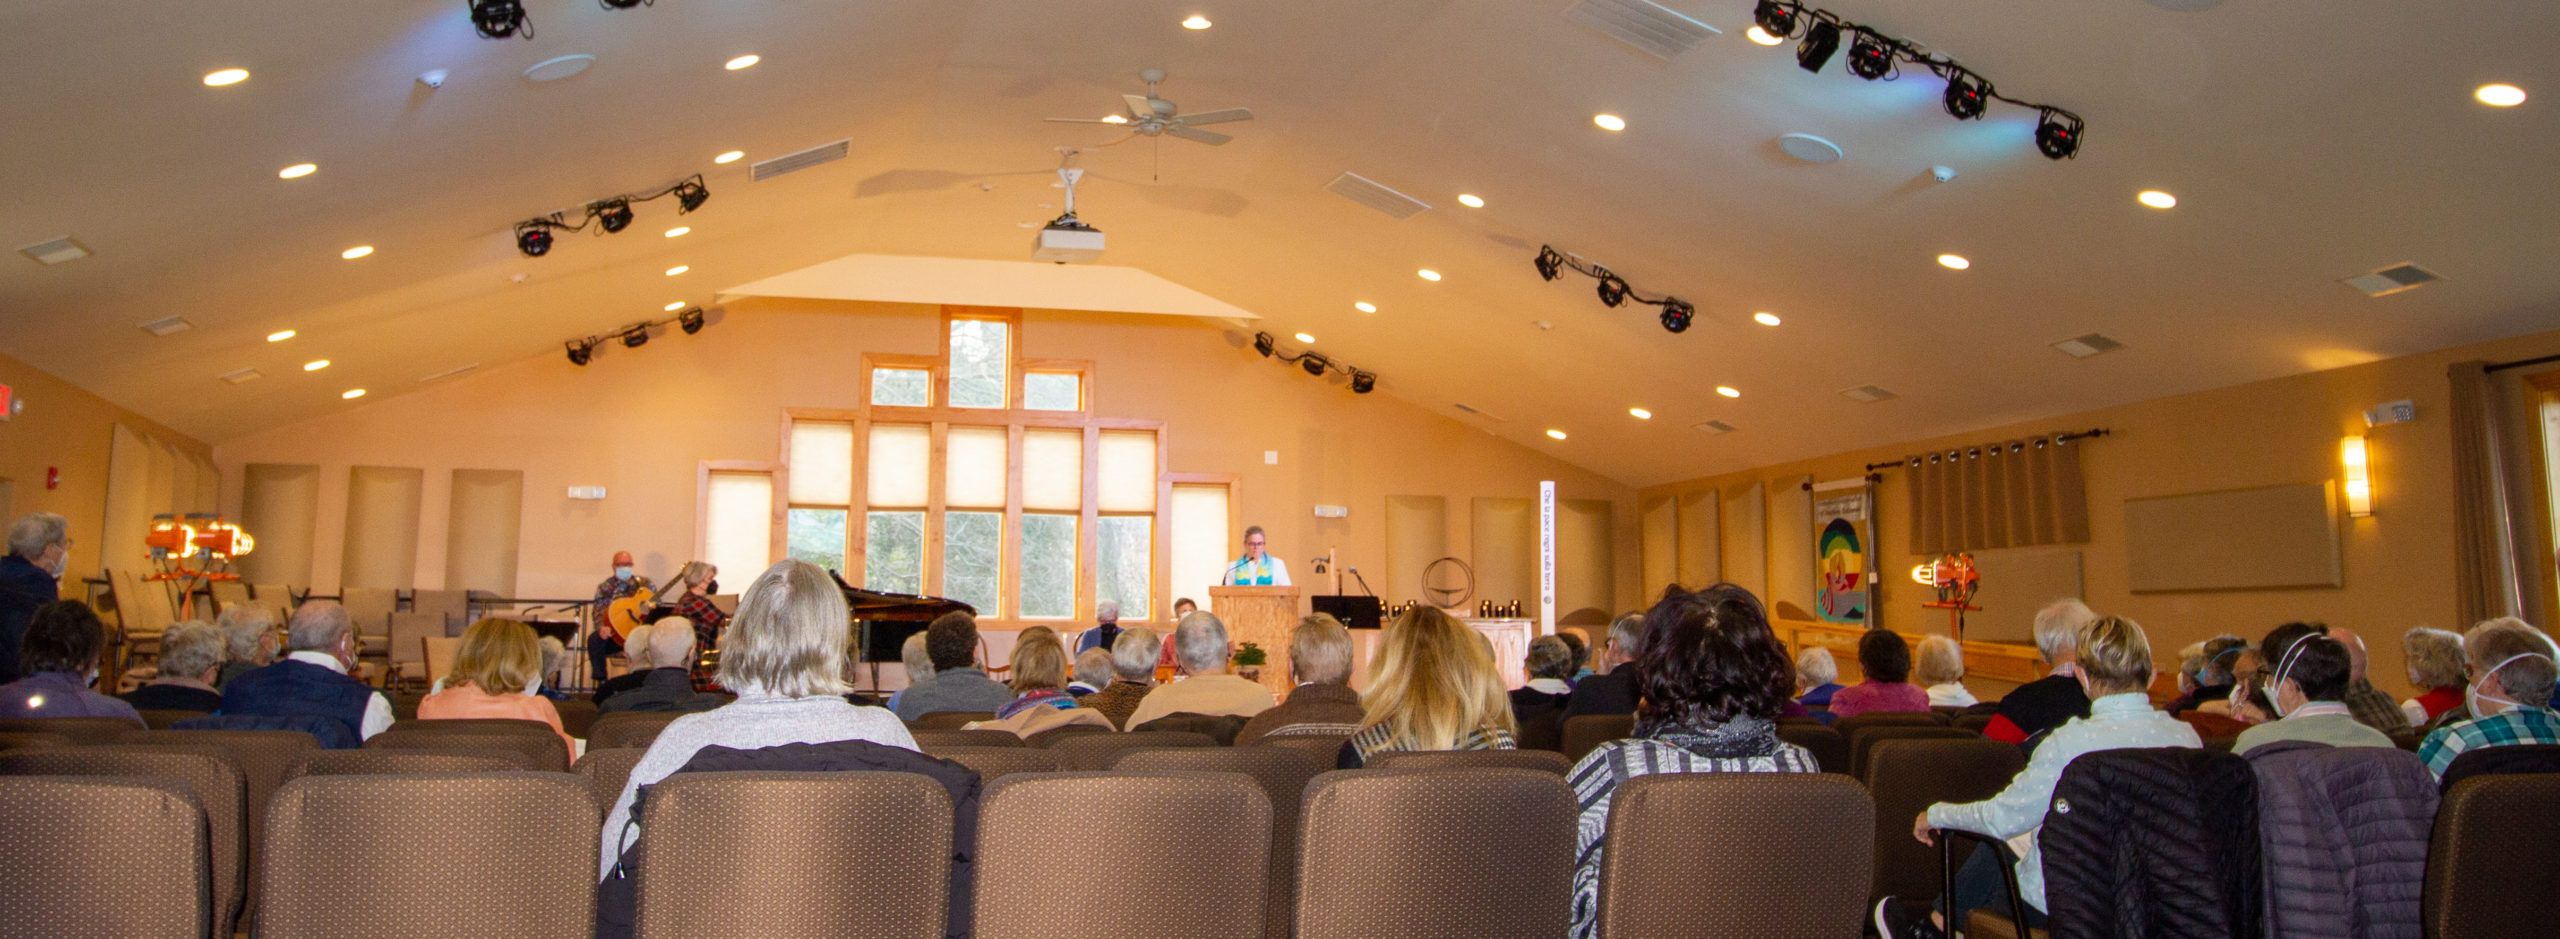 The UUSD congregation seen from the back of the sanctuary with rev. heather in the pulpit